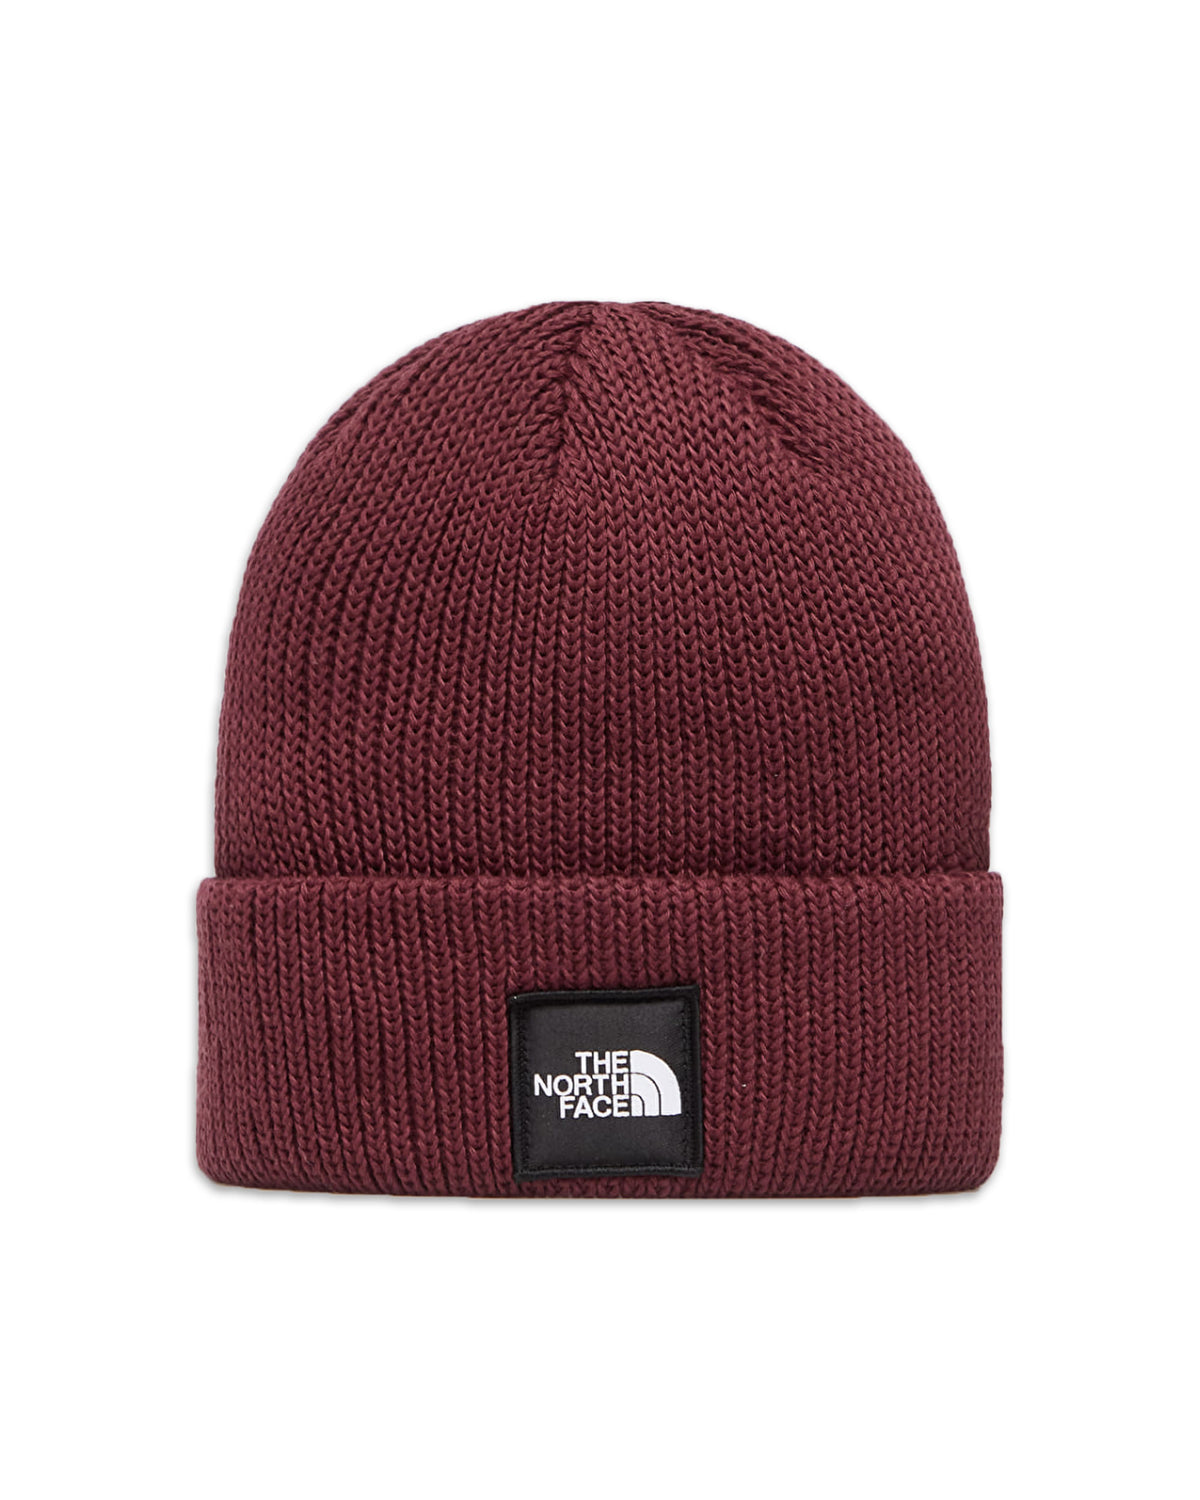 Beanie Hat The North Face Bordeaux NF0A55KCD4S1